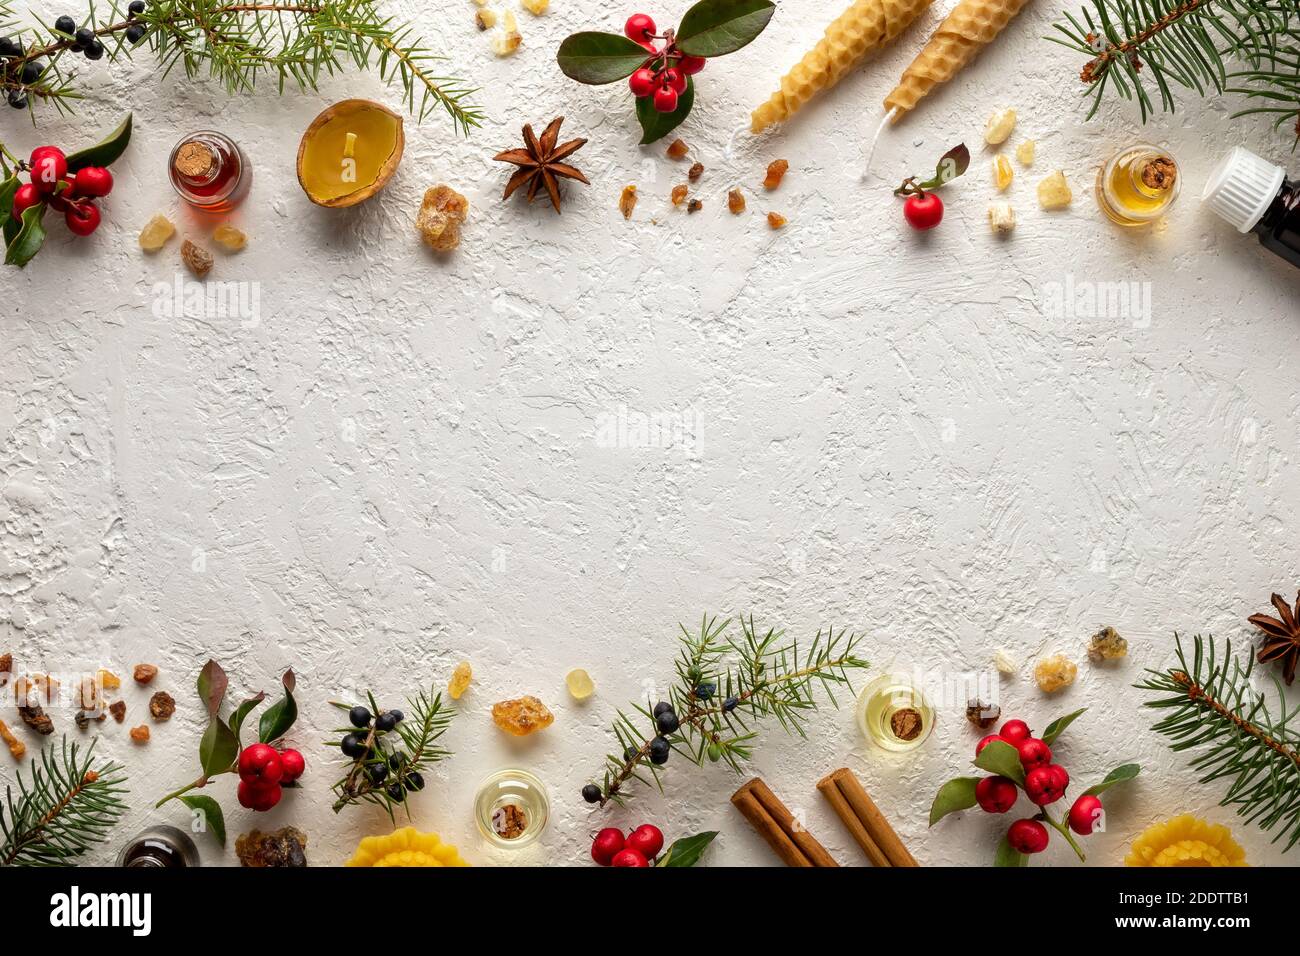 Christmas selection of essential oils with wintergreen, juniper, frankincense and other herbs, with copy space in the middle Stock Photo